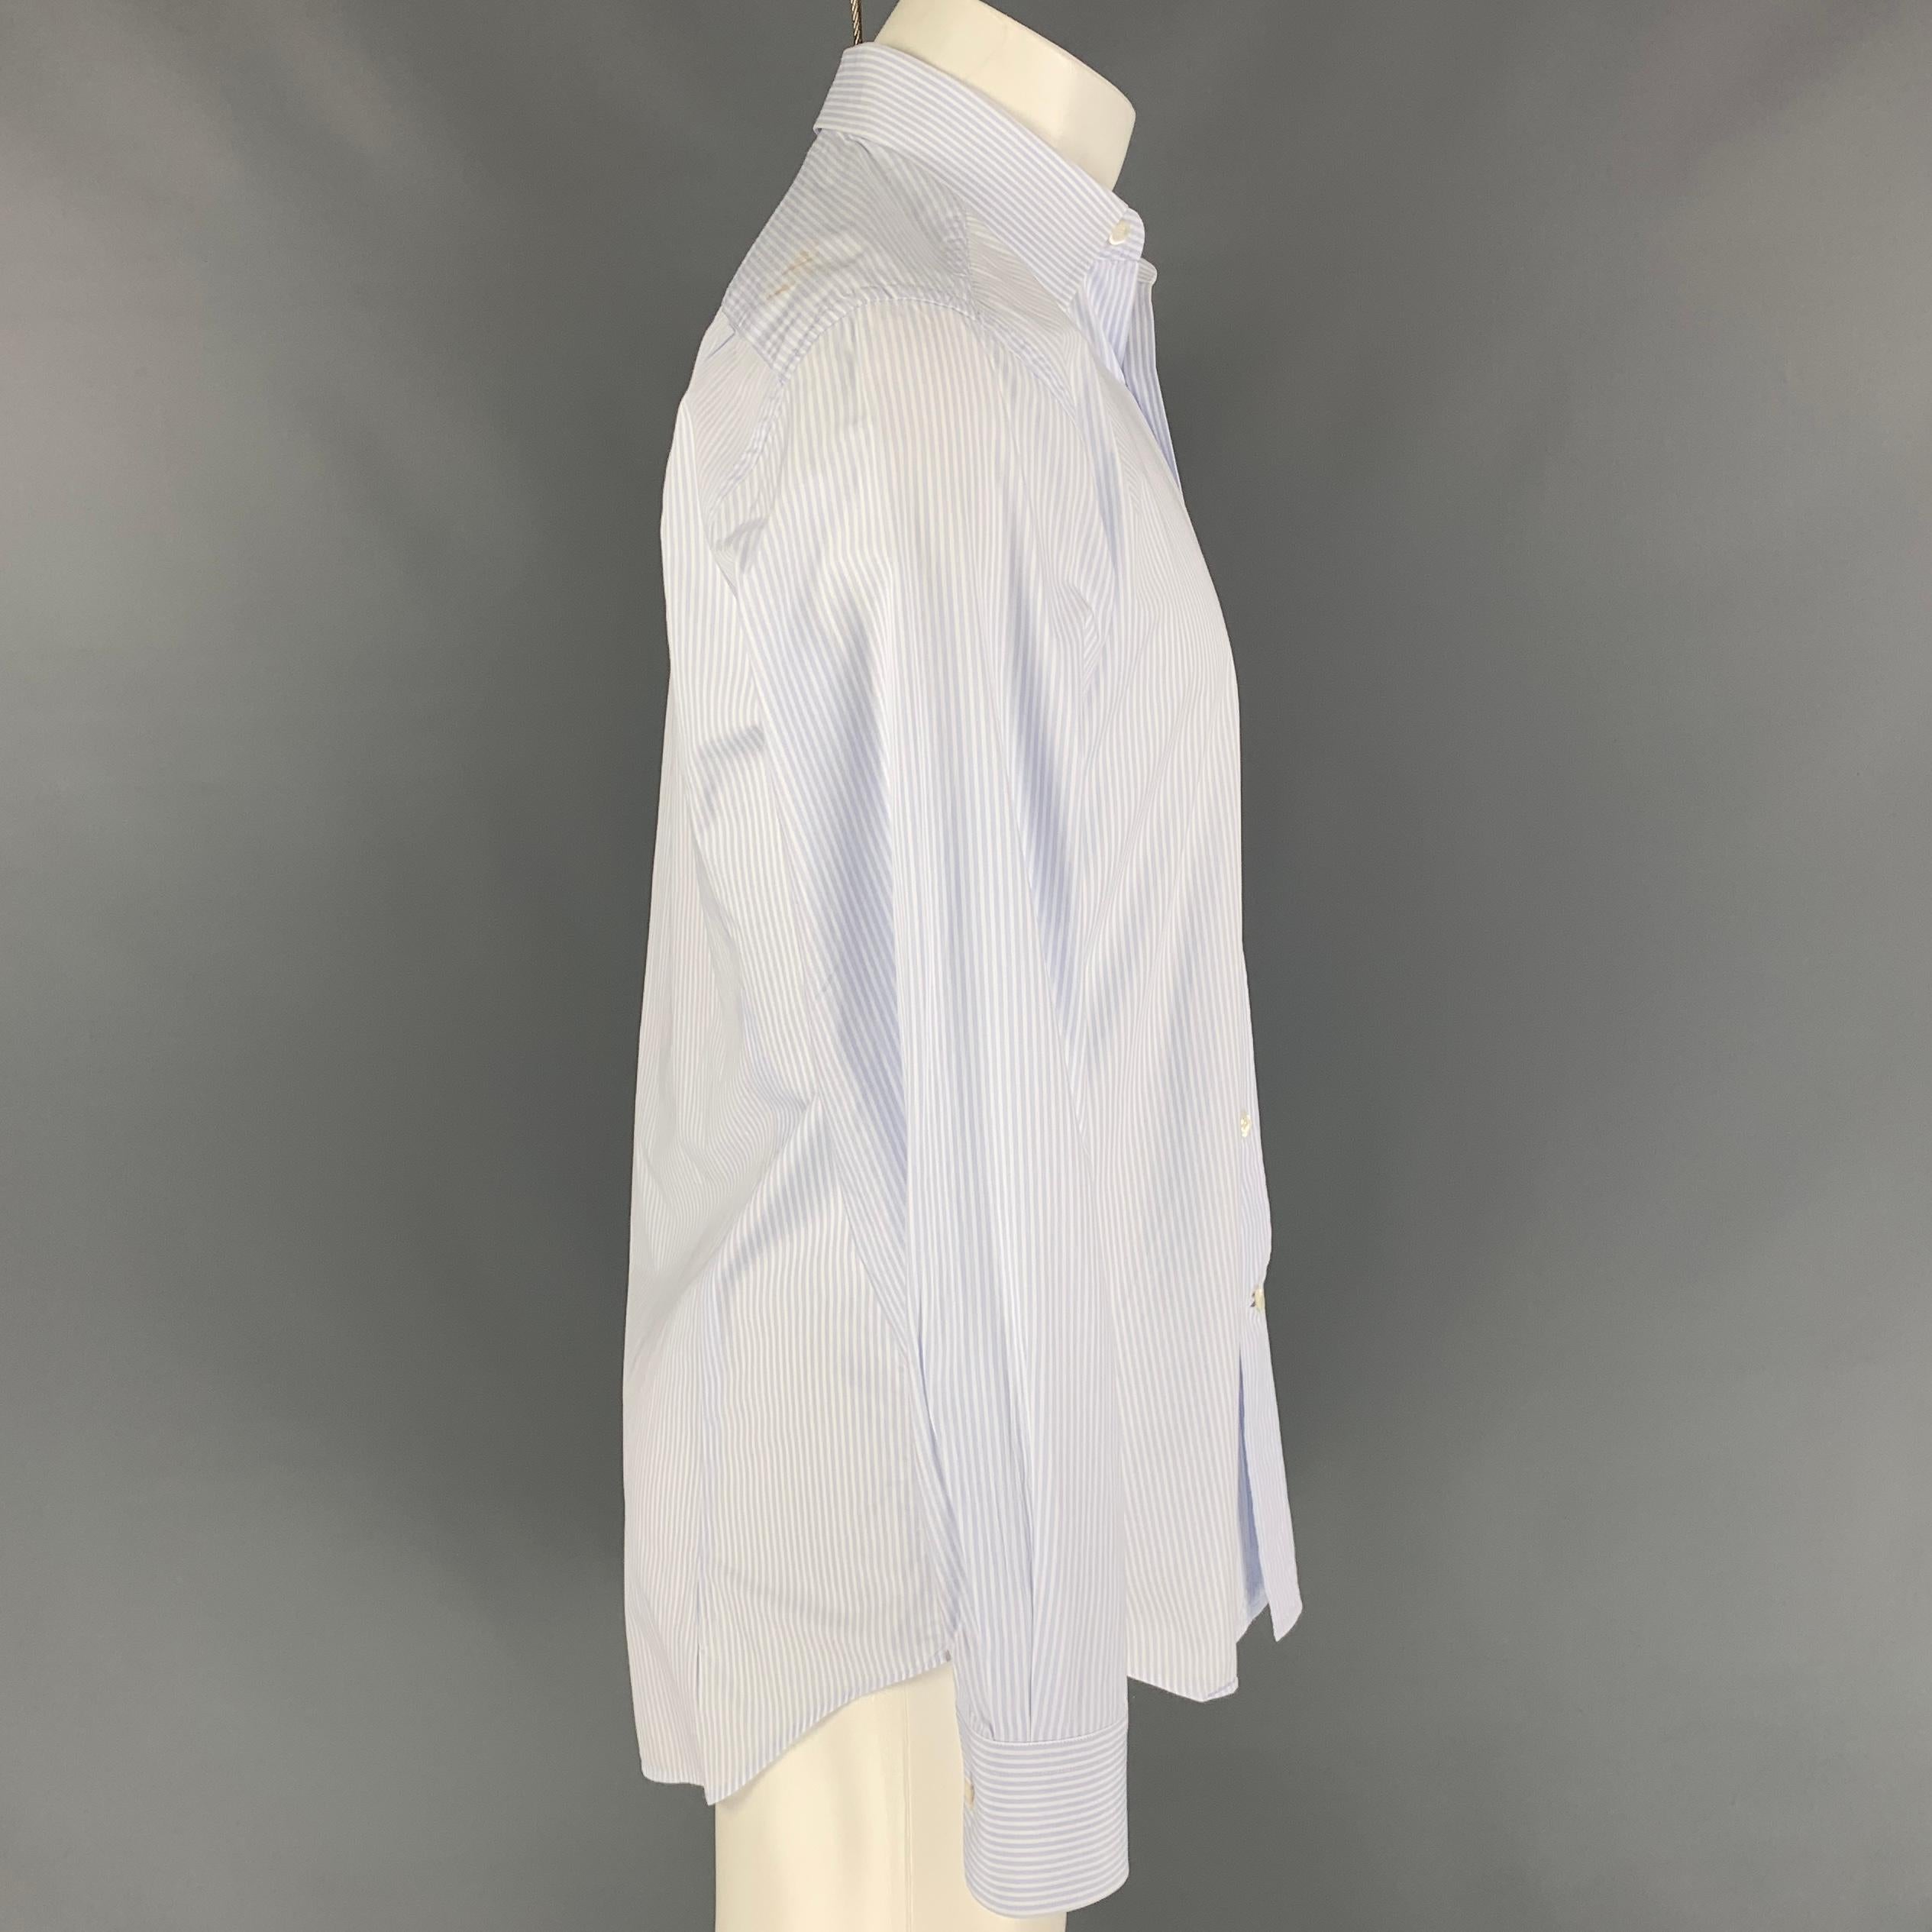 LANVIN long sleeve shirt comes in a light blue & white stripe cotton featuring a spread collar and a buttoned closure. Made in Italy. 

Good Pre-Owned Condition. Discoloration at back.
Marked: 39/15.5

Measurements:

Shoulder: 18.5 in.
Chest: 42